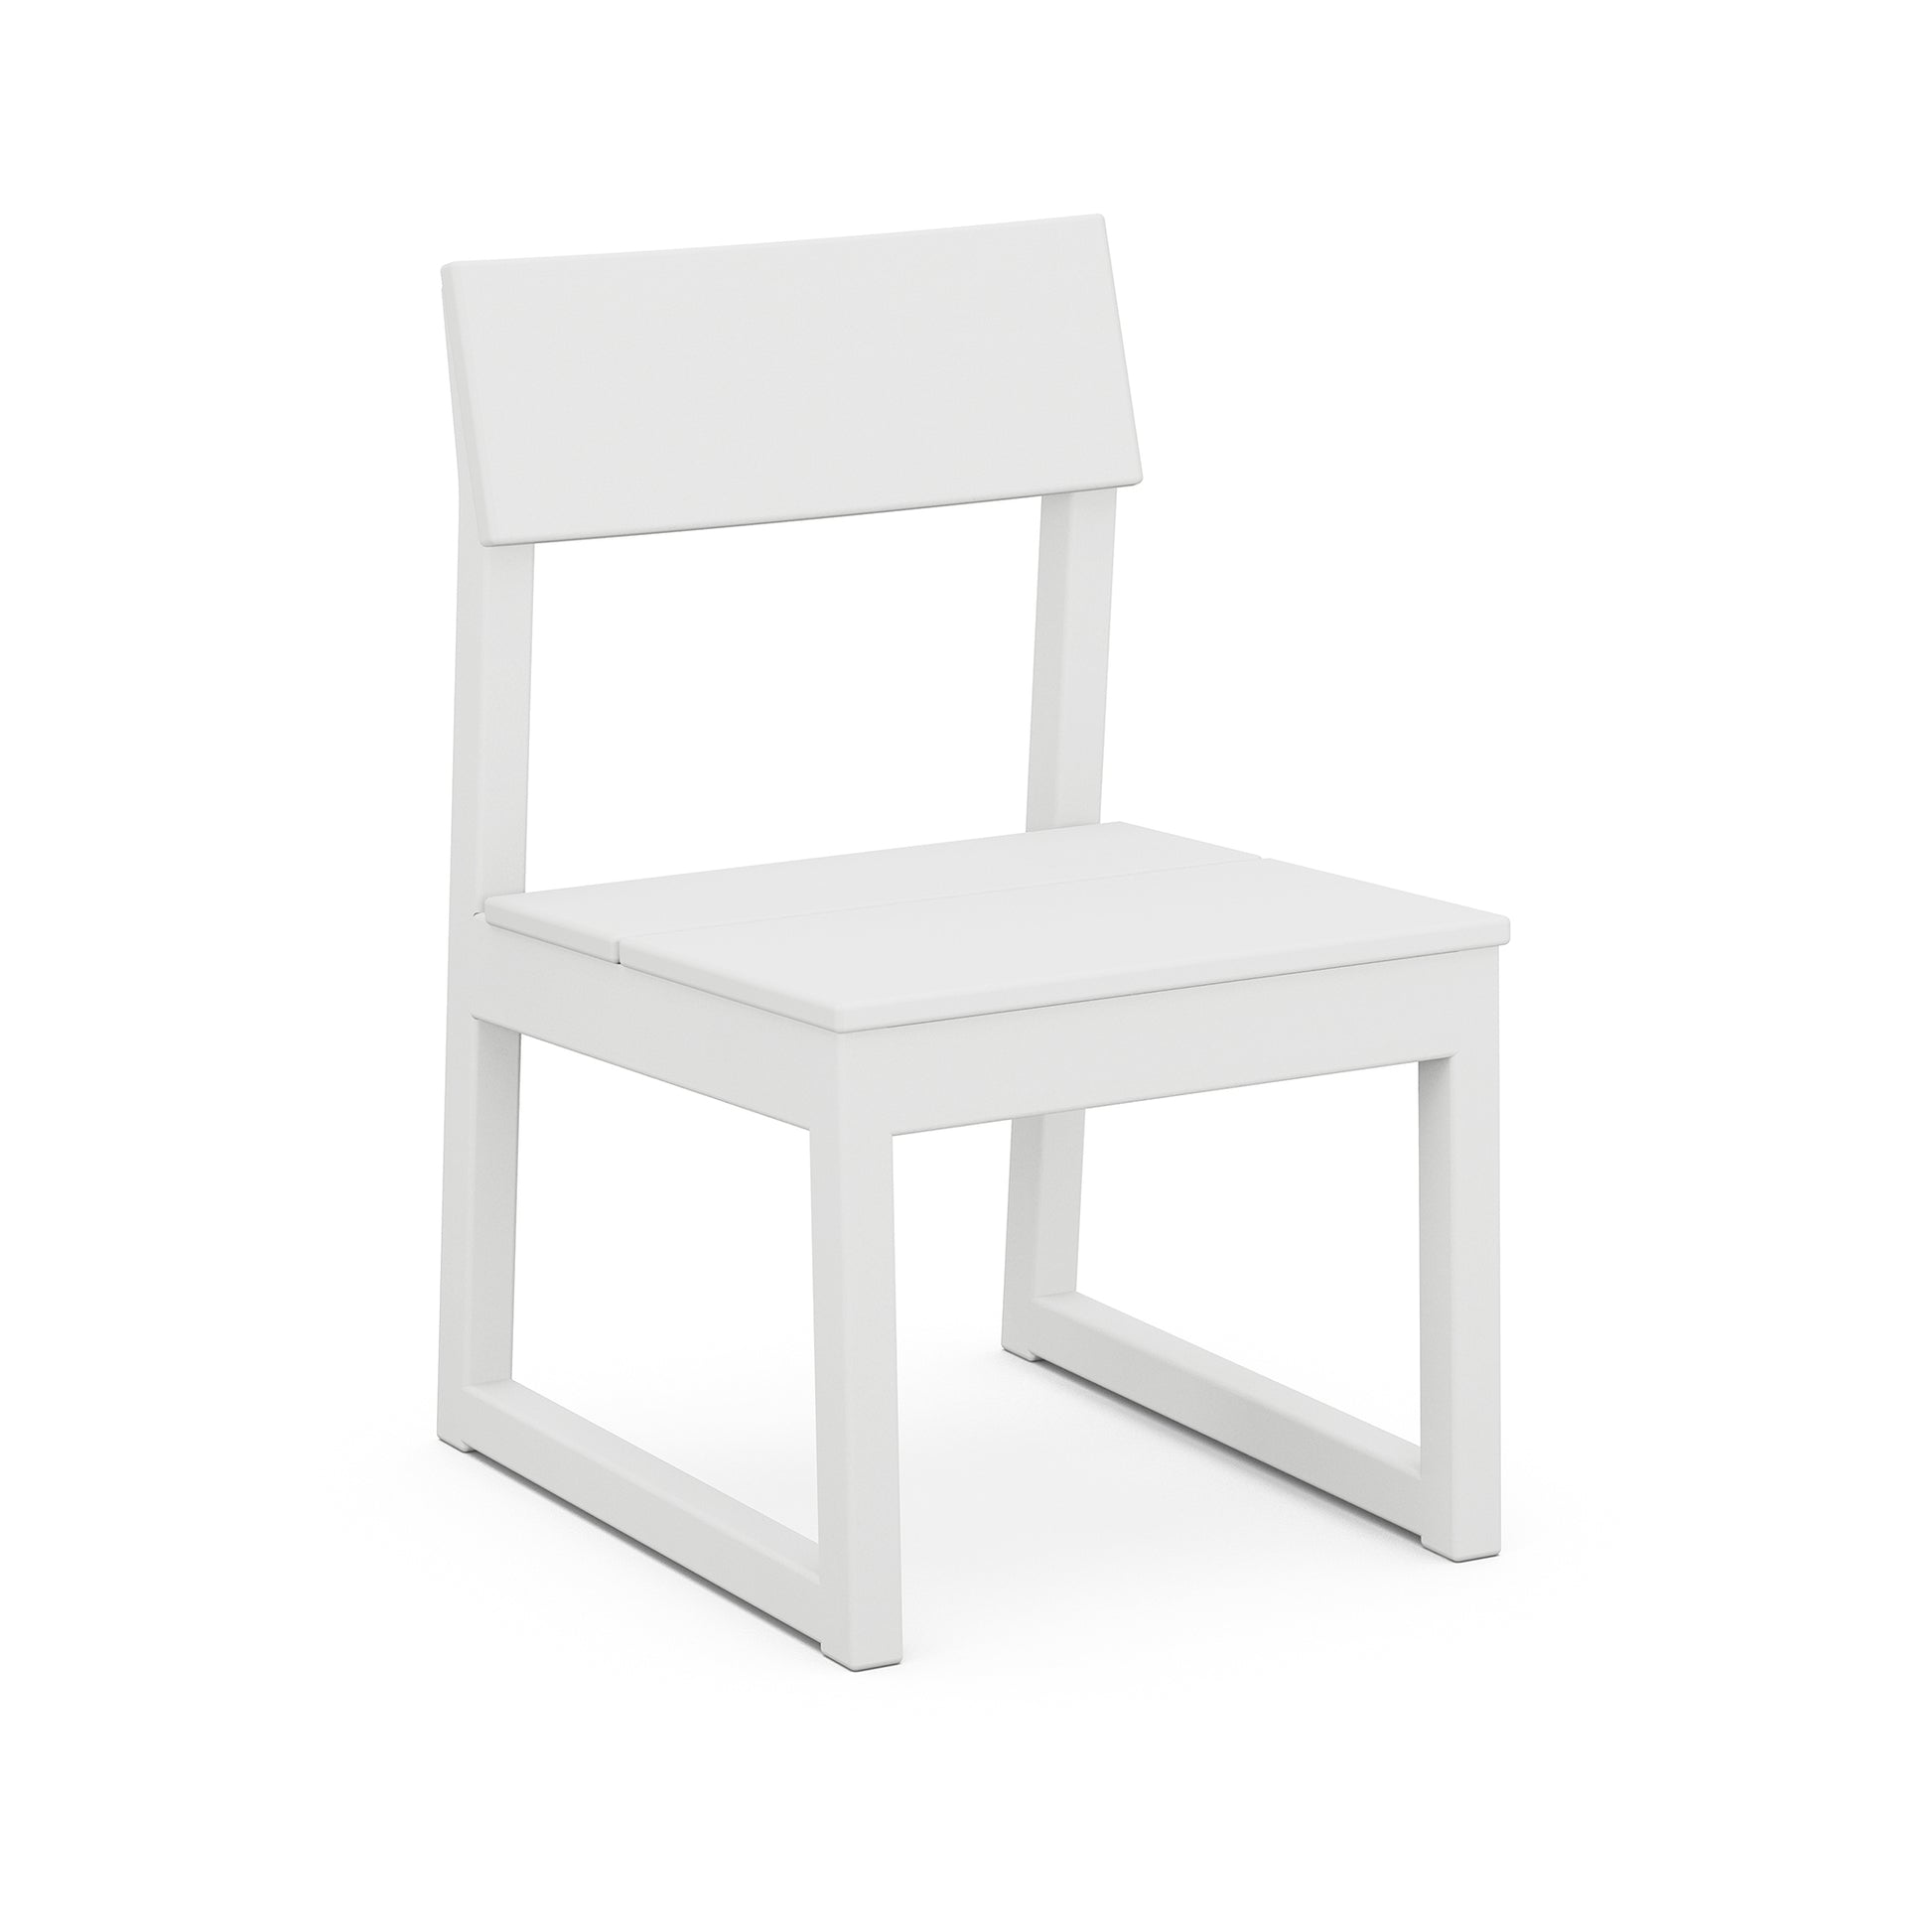 A minimalist white POLYWOOD EDGE Dining Side Chair with a square seat and backrest, featuring a simple, geometric frame with marine-grade hardware, isolated on a white background.